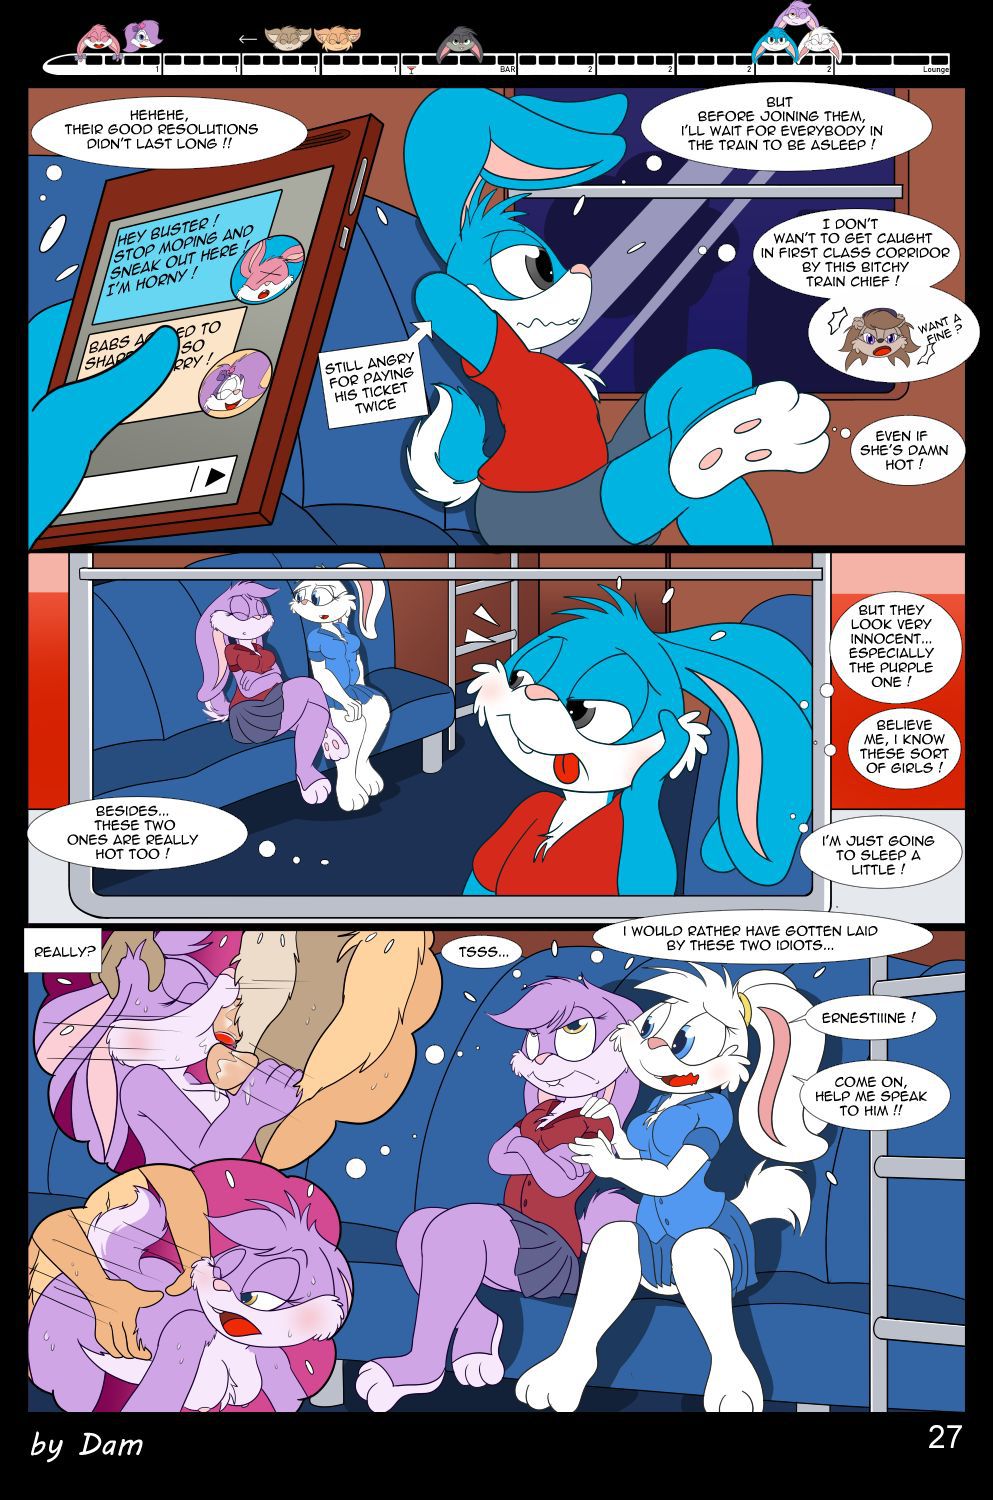 [Dam] Toons on a train [Ongoing] 27